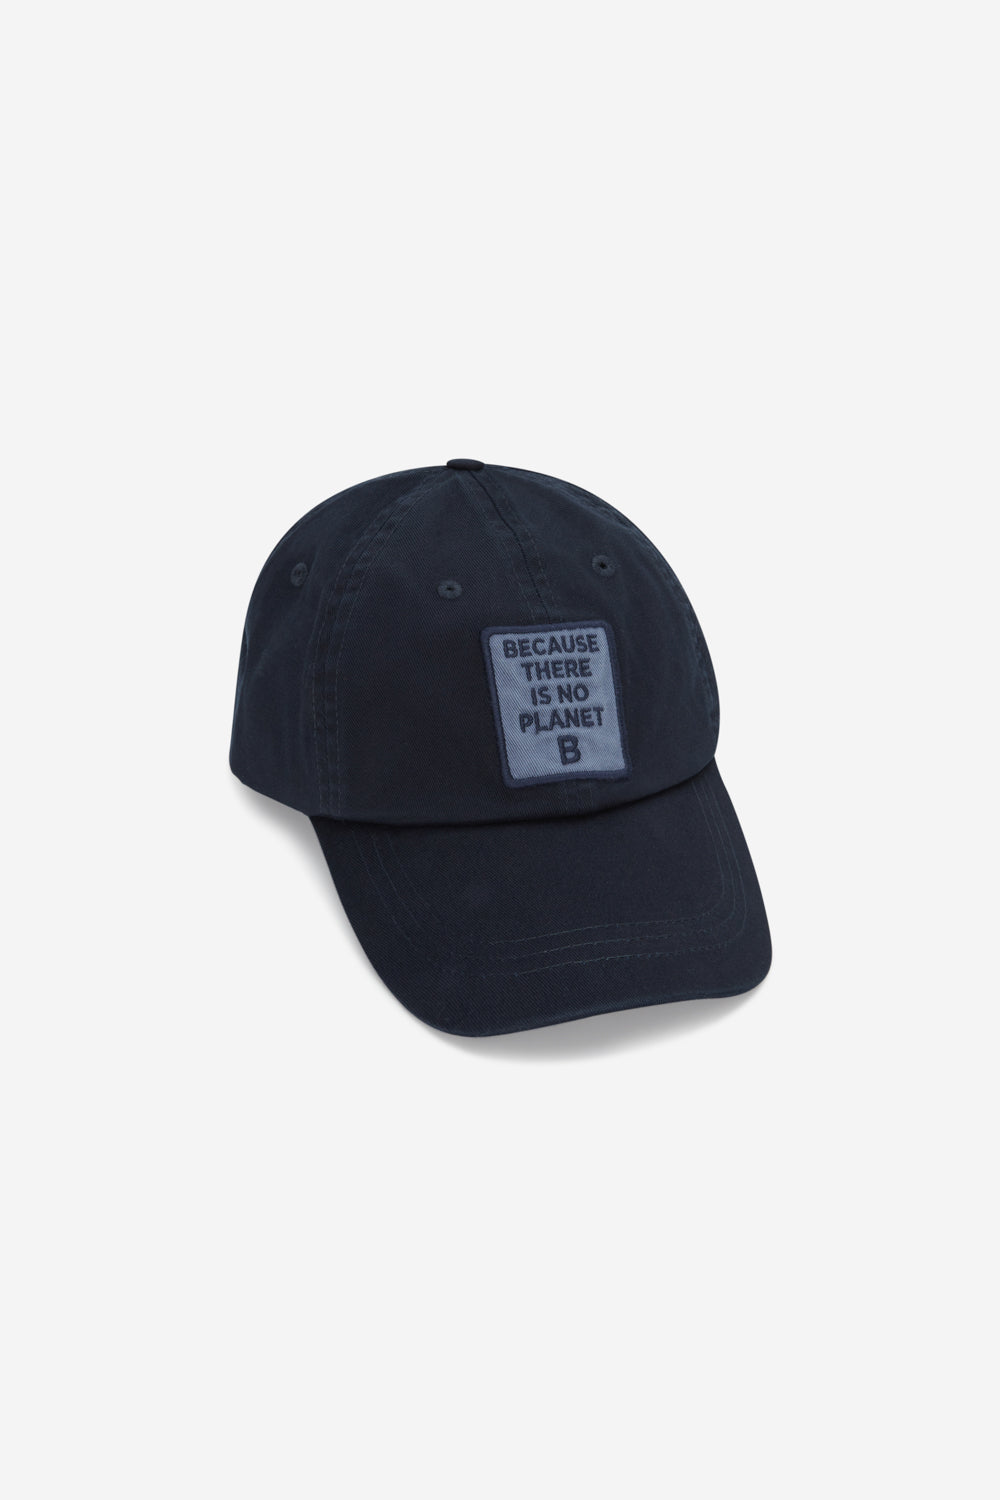 CASQUETTE PATCH BECAUSE BLEUE